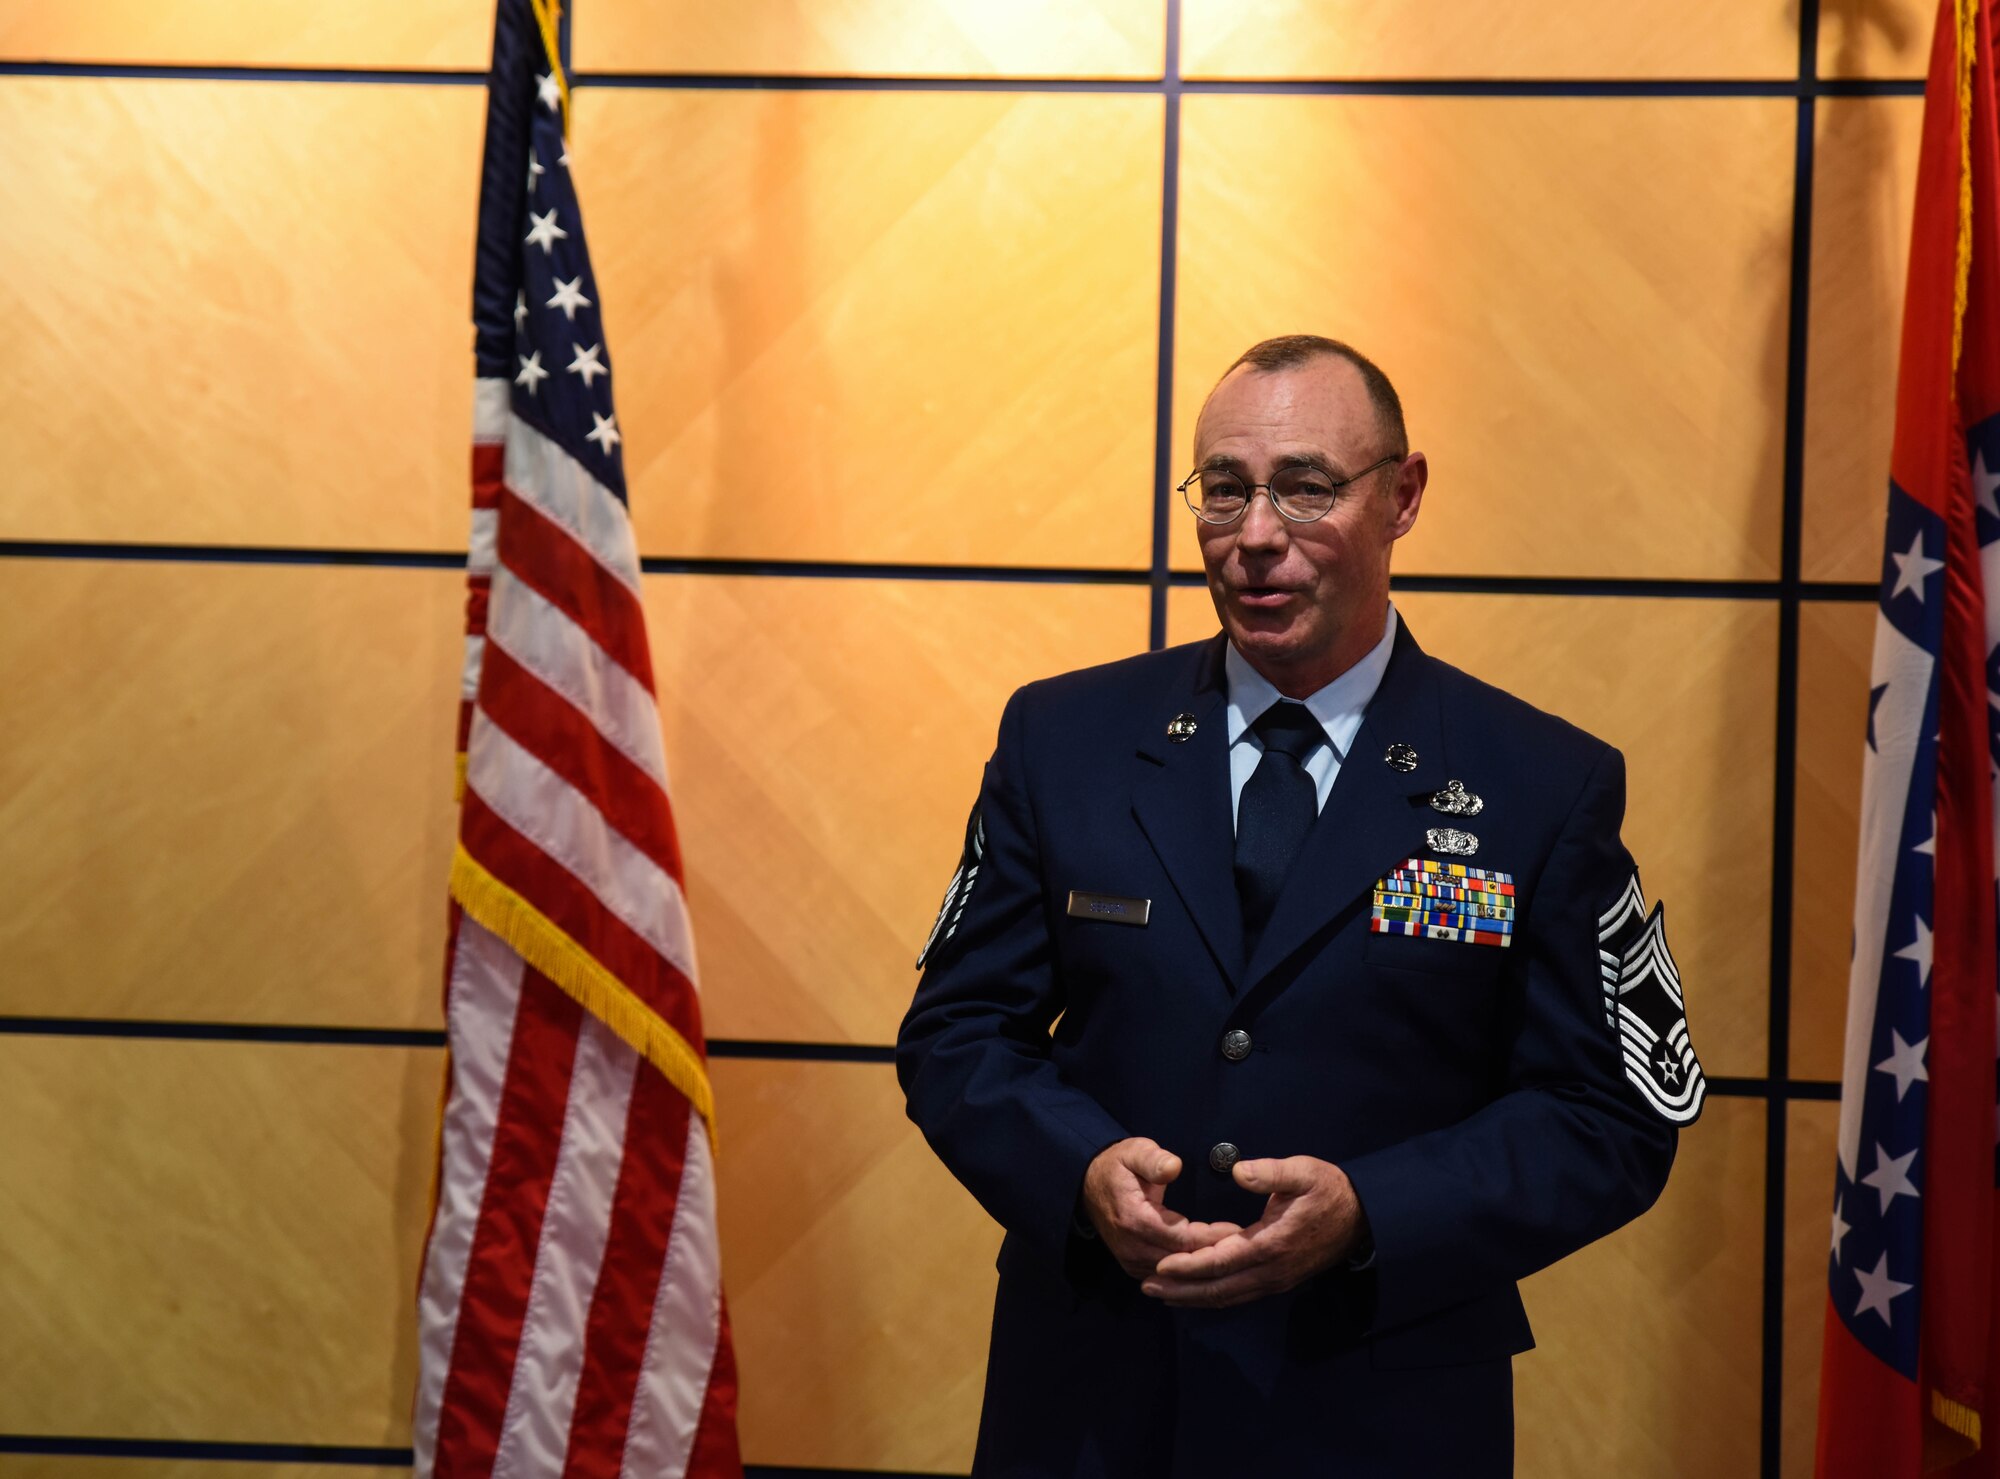 Chief Master Sgt. Ricky Sehorn, chief of transportation, speaks to Airmen in attendance June 4, 2016, during his promotion ceremony at Ebbing Air National Guard Base, Fort Smith, Ark. Sehorn has served in vehicle maintenance for the past 24 years and has been chief of transportation since 2014. (U.S. Air National Guard photo by Senior Airman Cody Martin/Released)